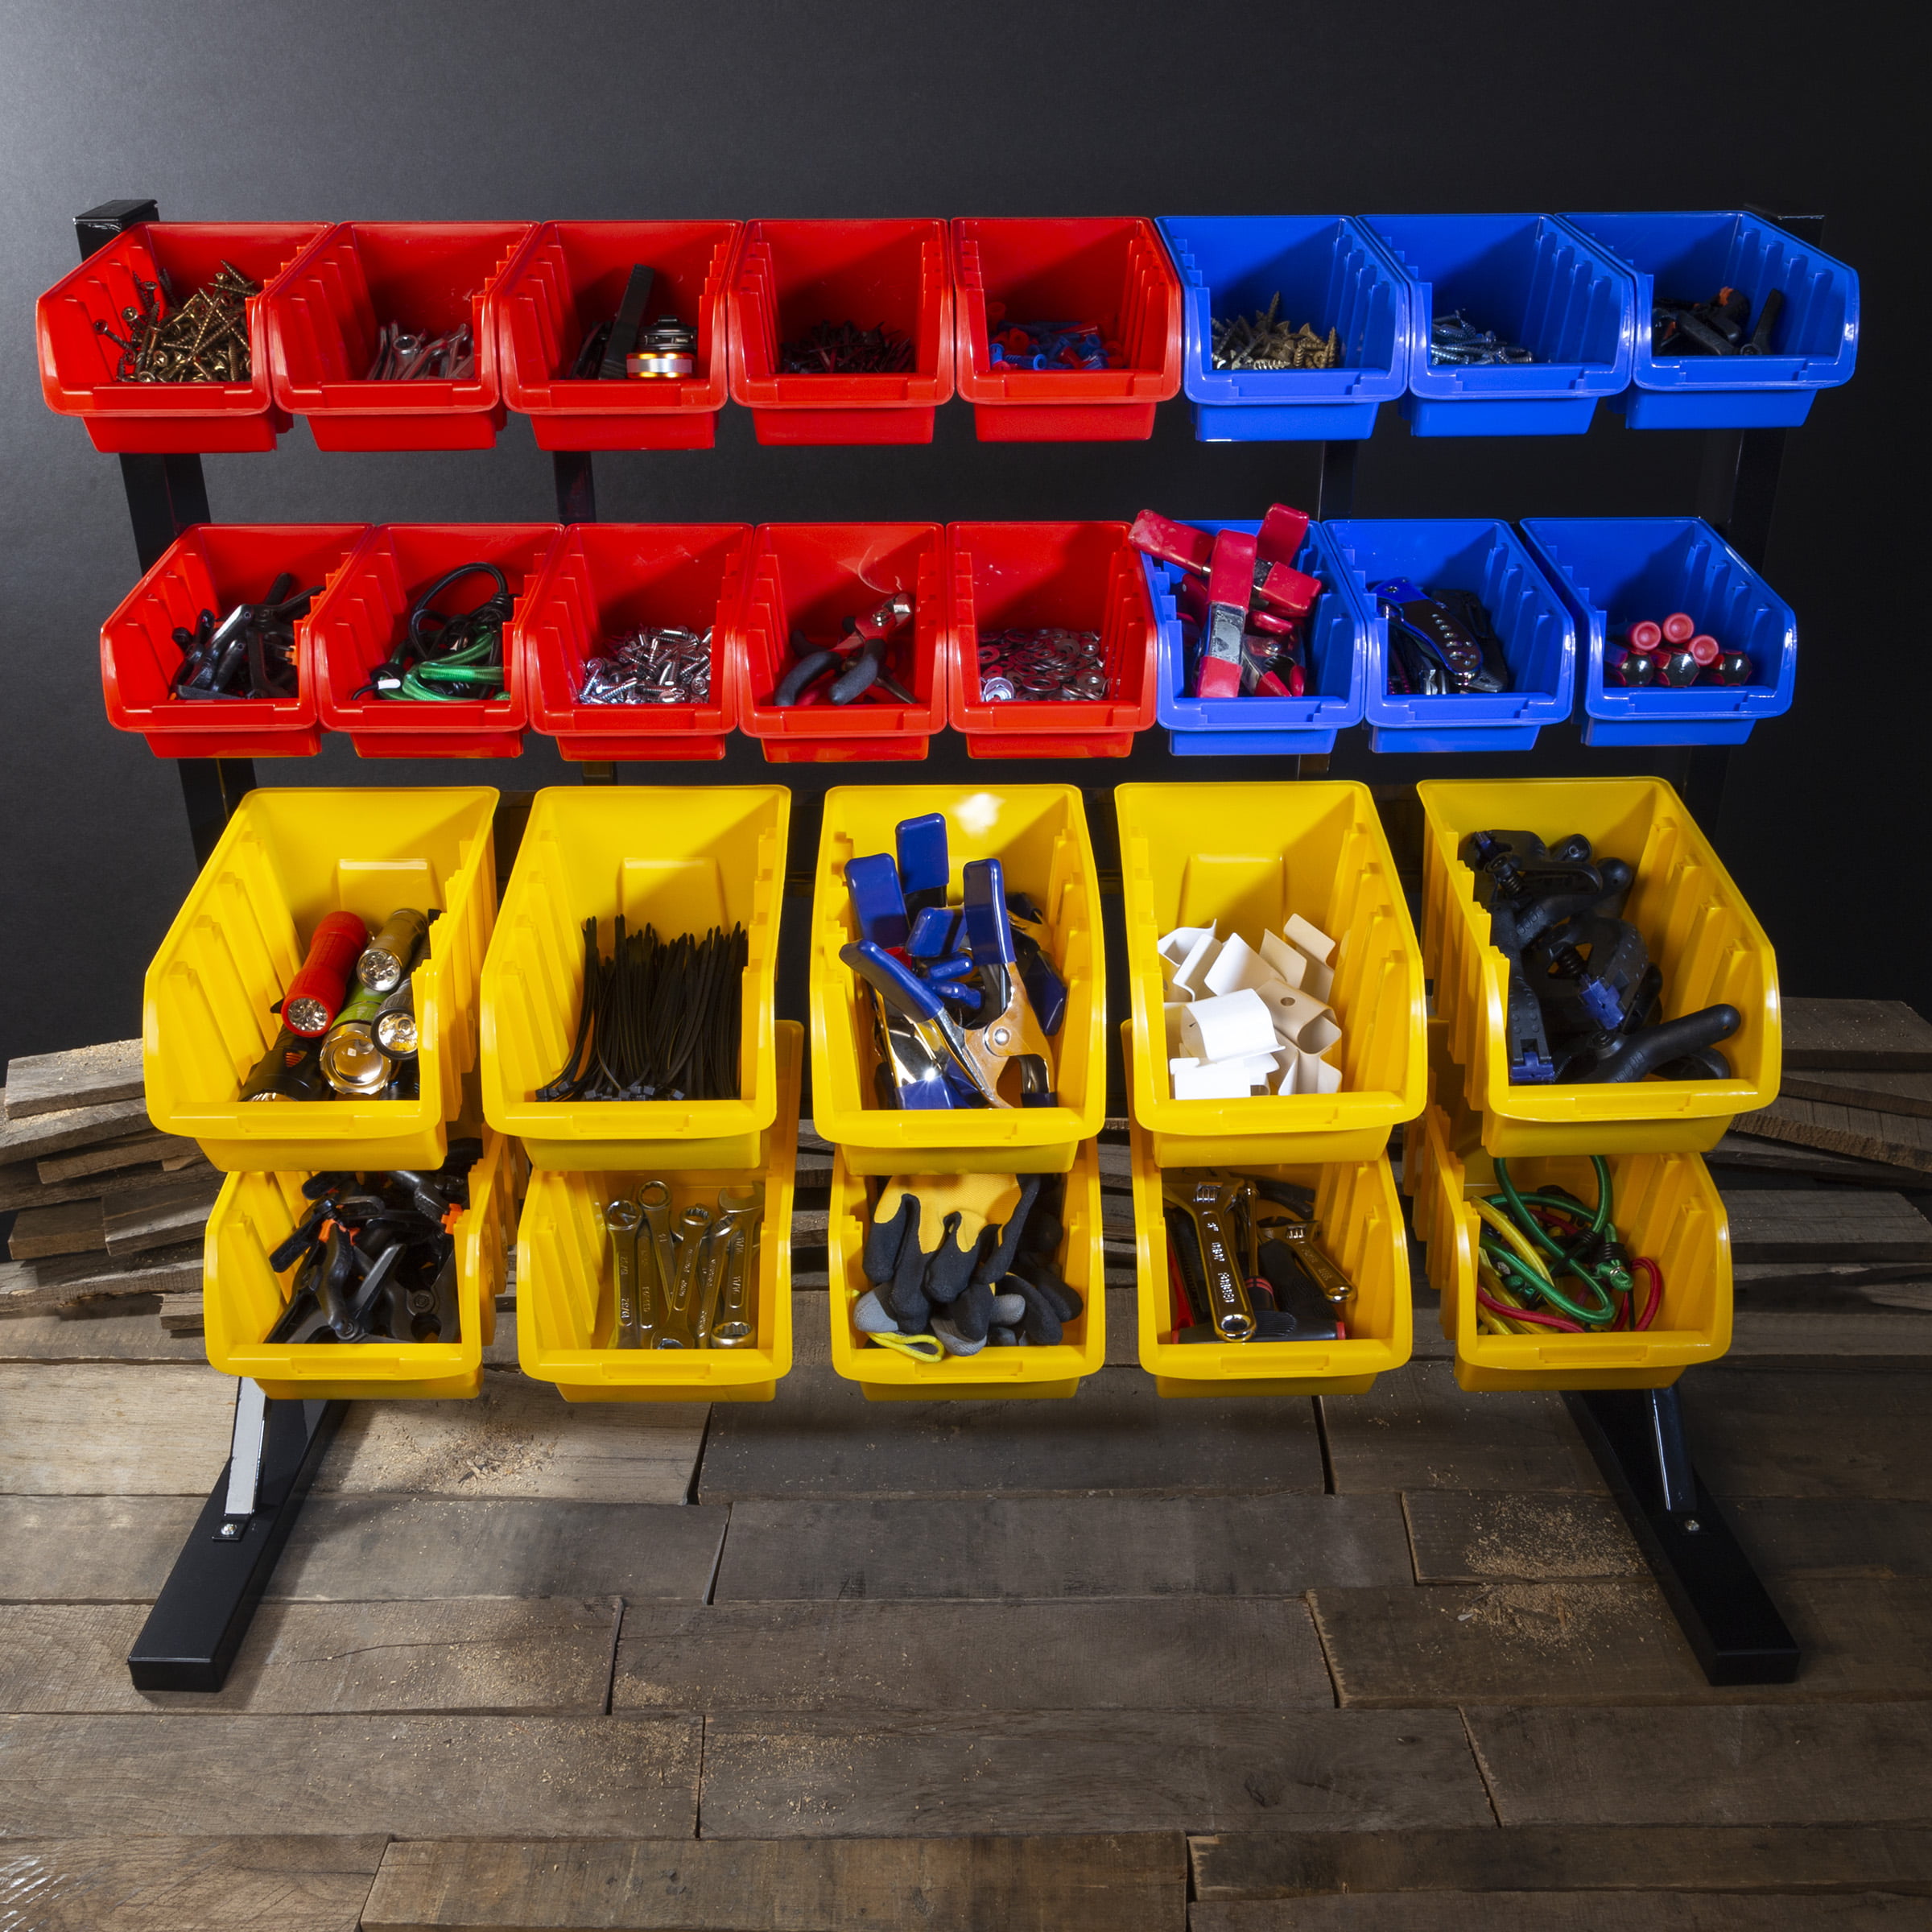 47 Bin Tool Organizer ? Wall Mountable Container With Removable Drawers For Garage  Organization And Storage By Stalwart (red/blue) : Target